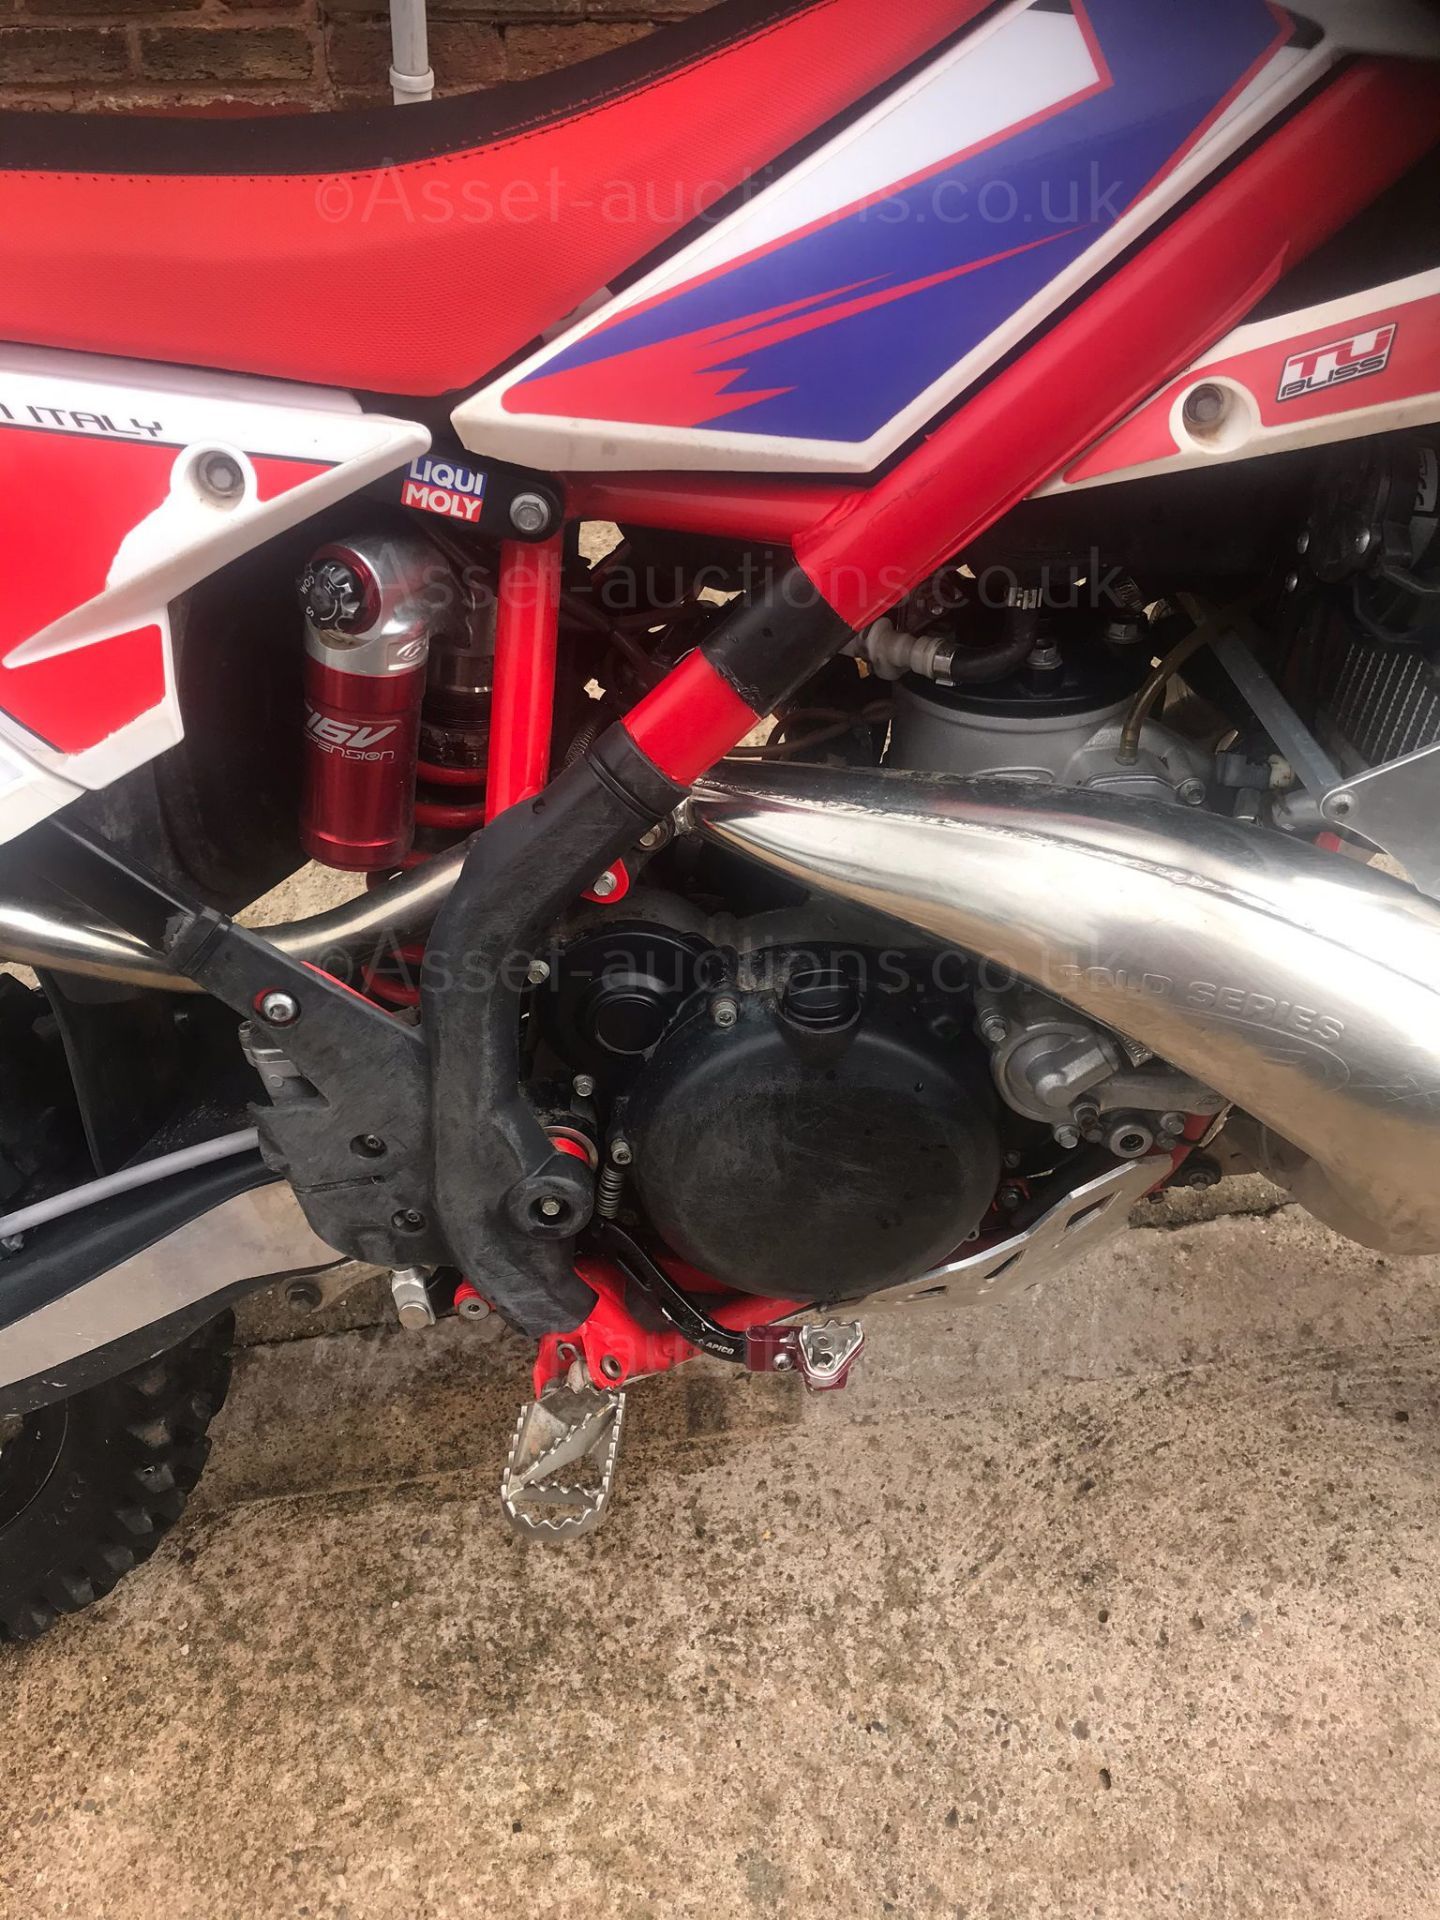 2016 BETA XTRAINER 300, ROAD REGISTERED, FRAME GUARDS, ENGINE GUARDS, FMF GNARLY PIPE *NO VAT* - Image 4 of 4